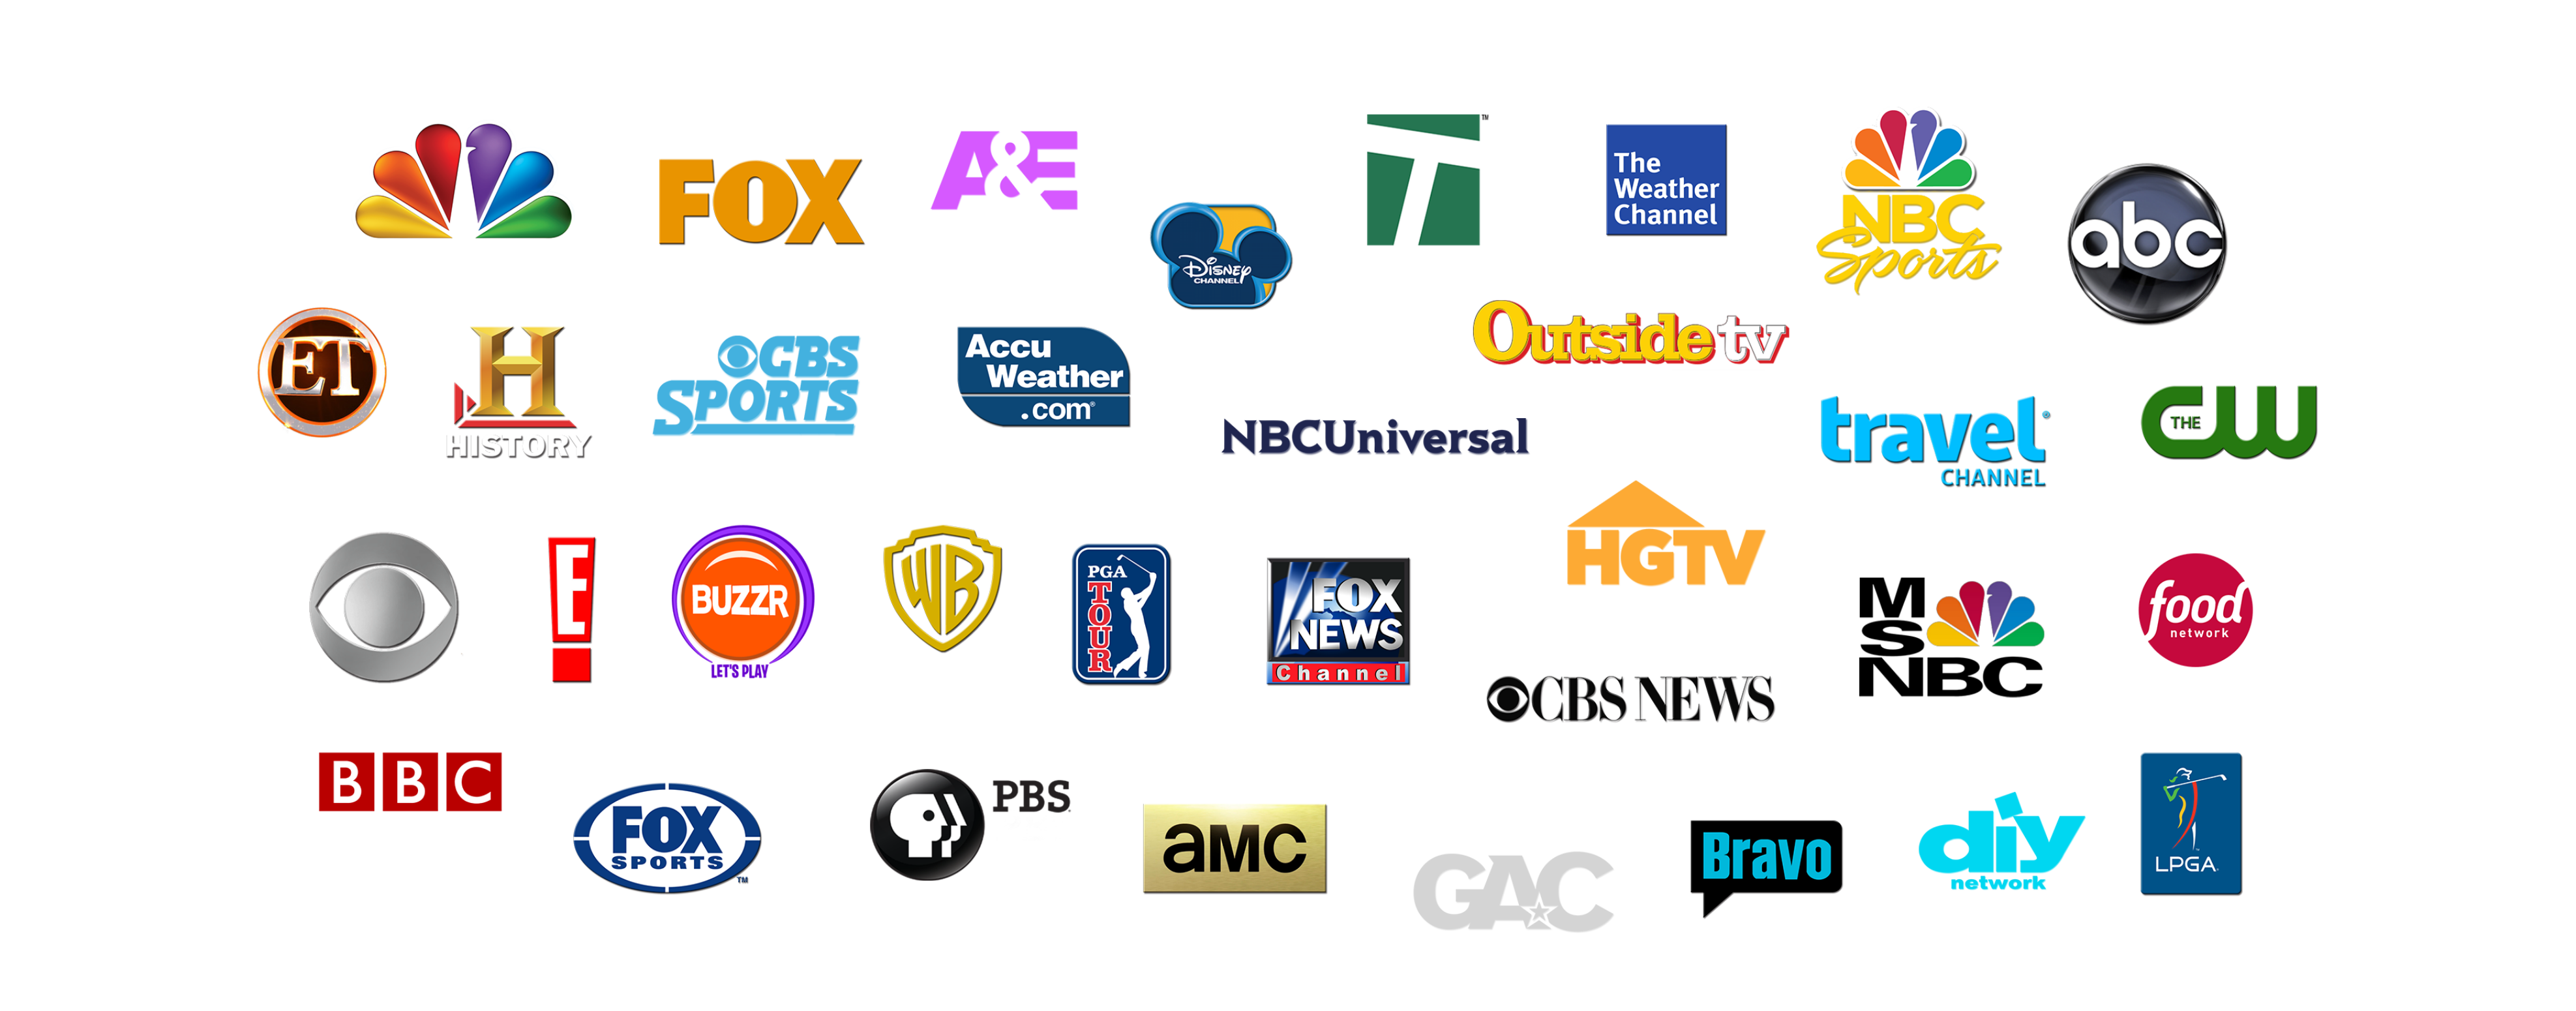 https://cleartvmedia.com/wp-content/uploads/2021/01/logos-3950x1550.png